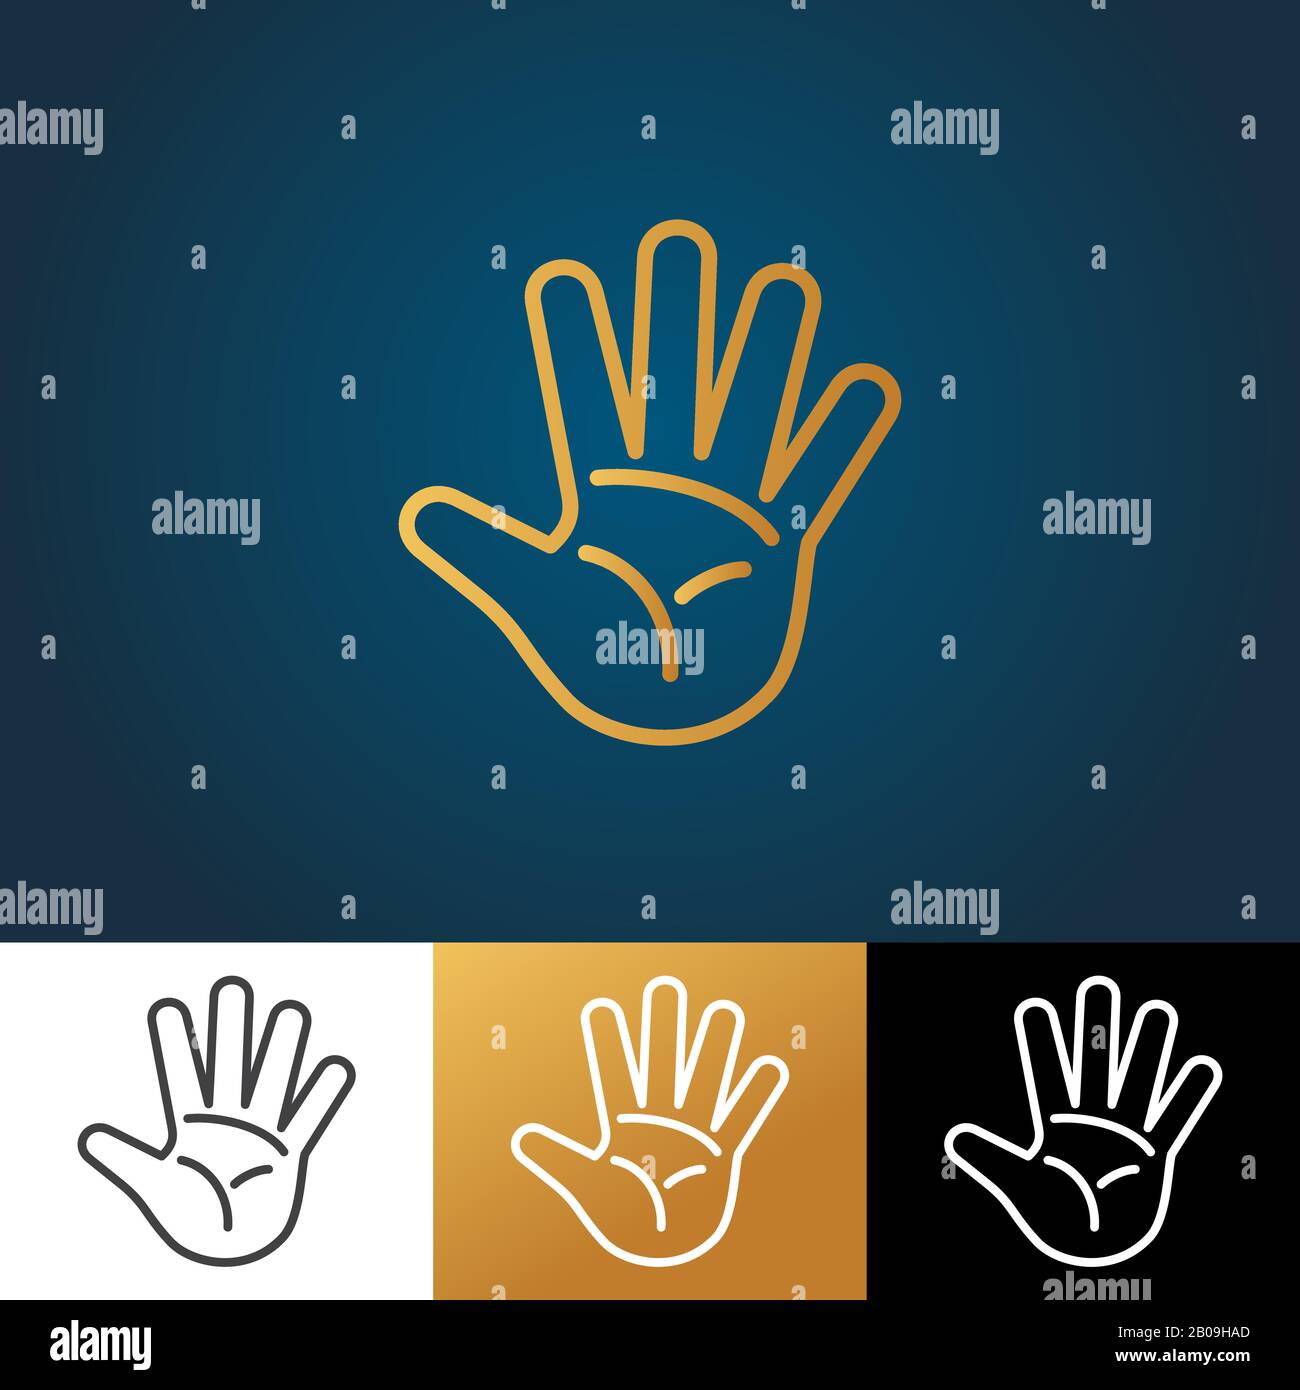 Open hand vector icon in four variations. Human arm illustration Stock Vector